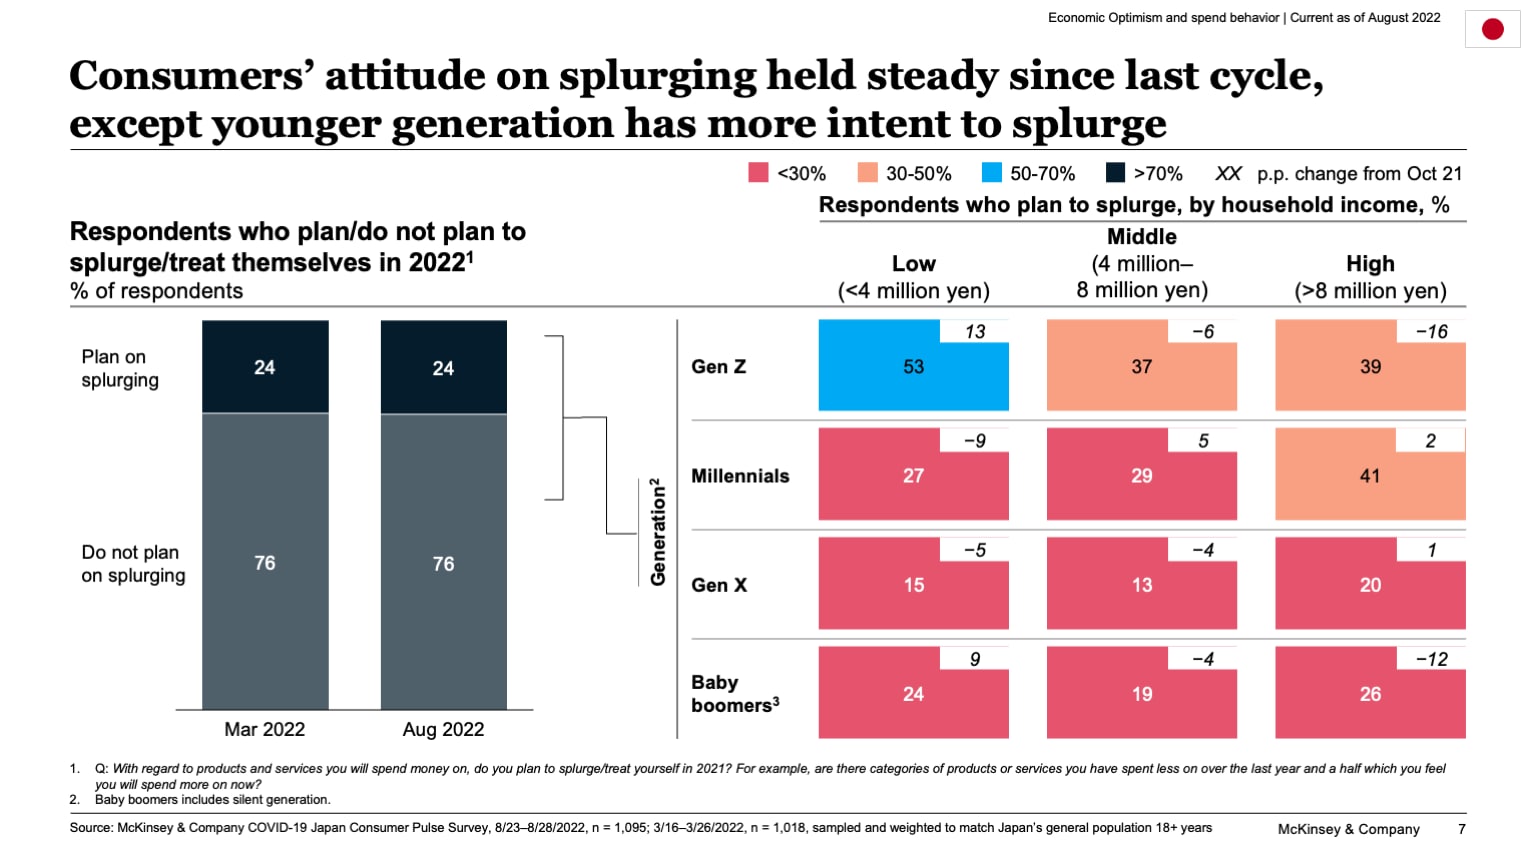 Consumers’ attitude on splurging held steady since last cycle, except younger generation has more intent to splurge